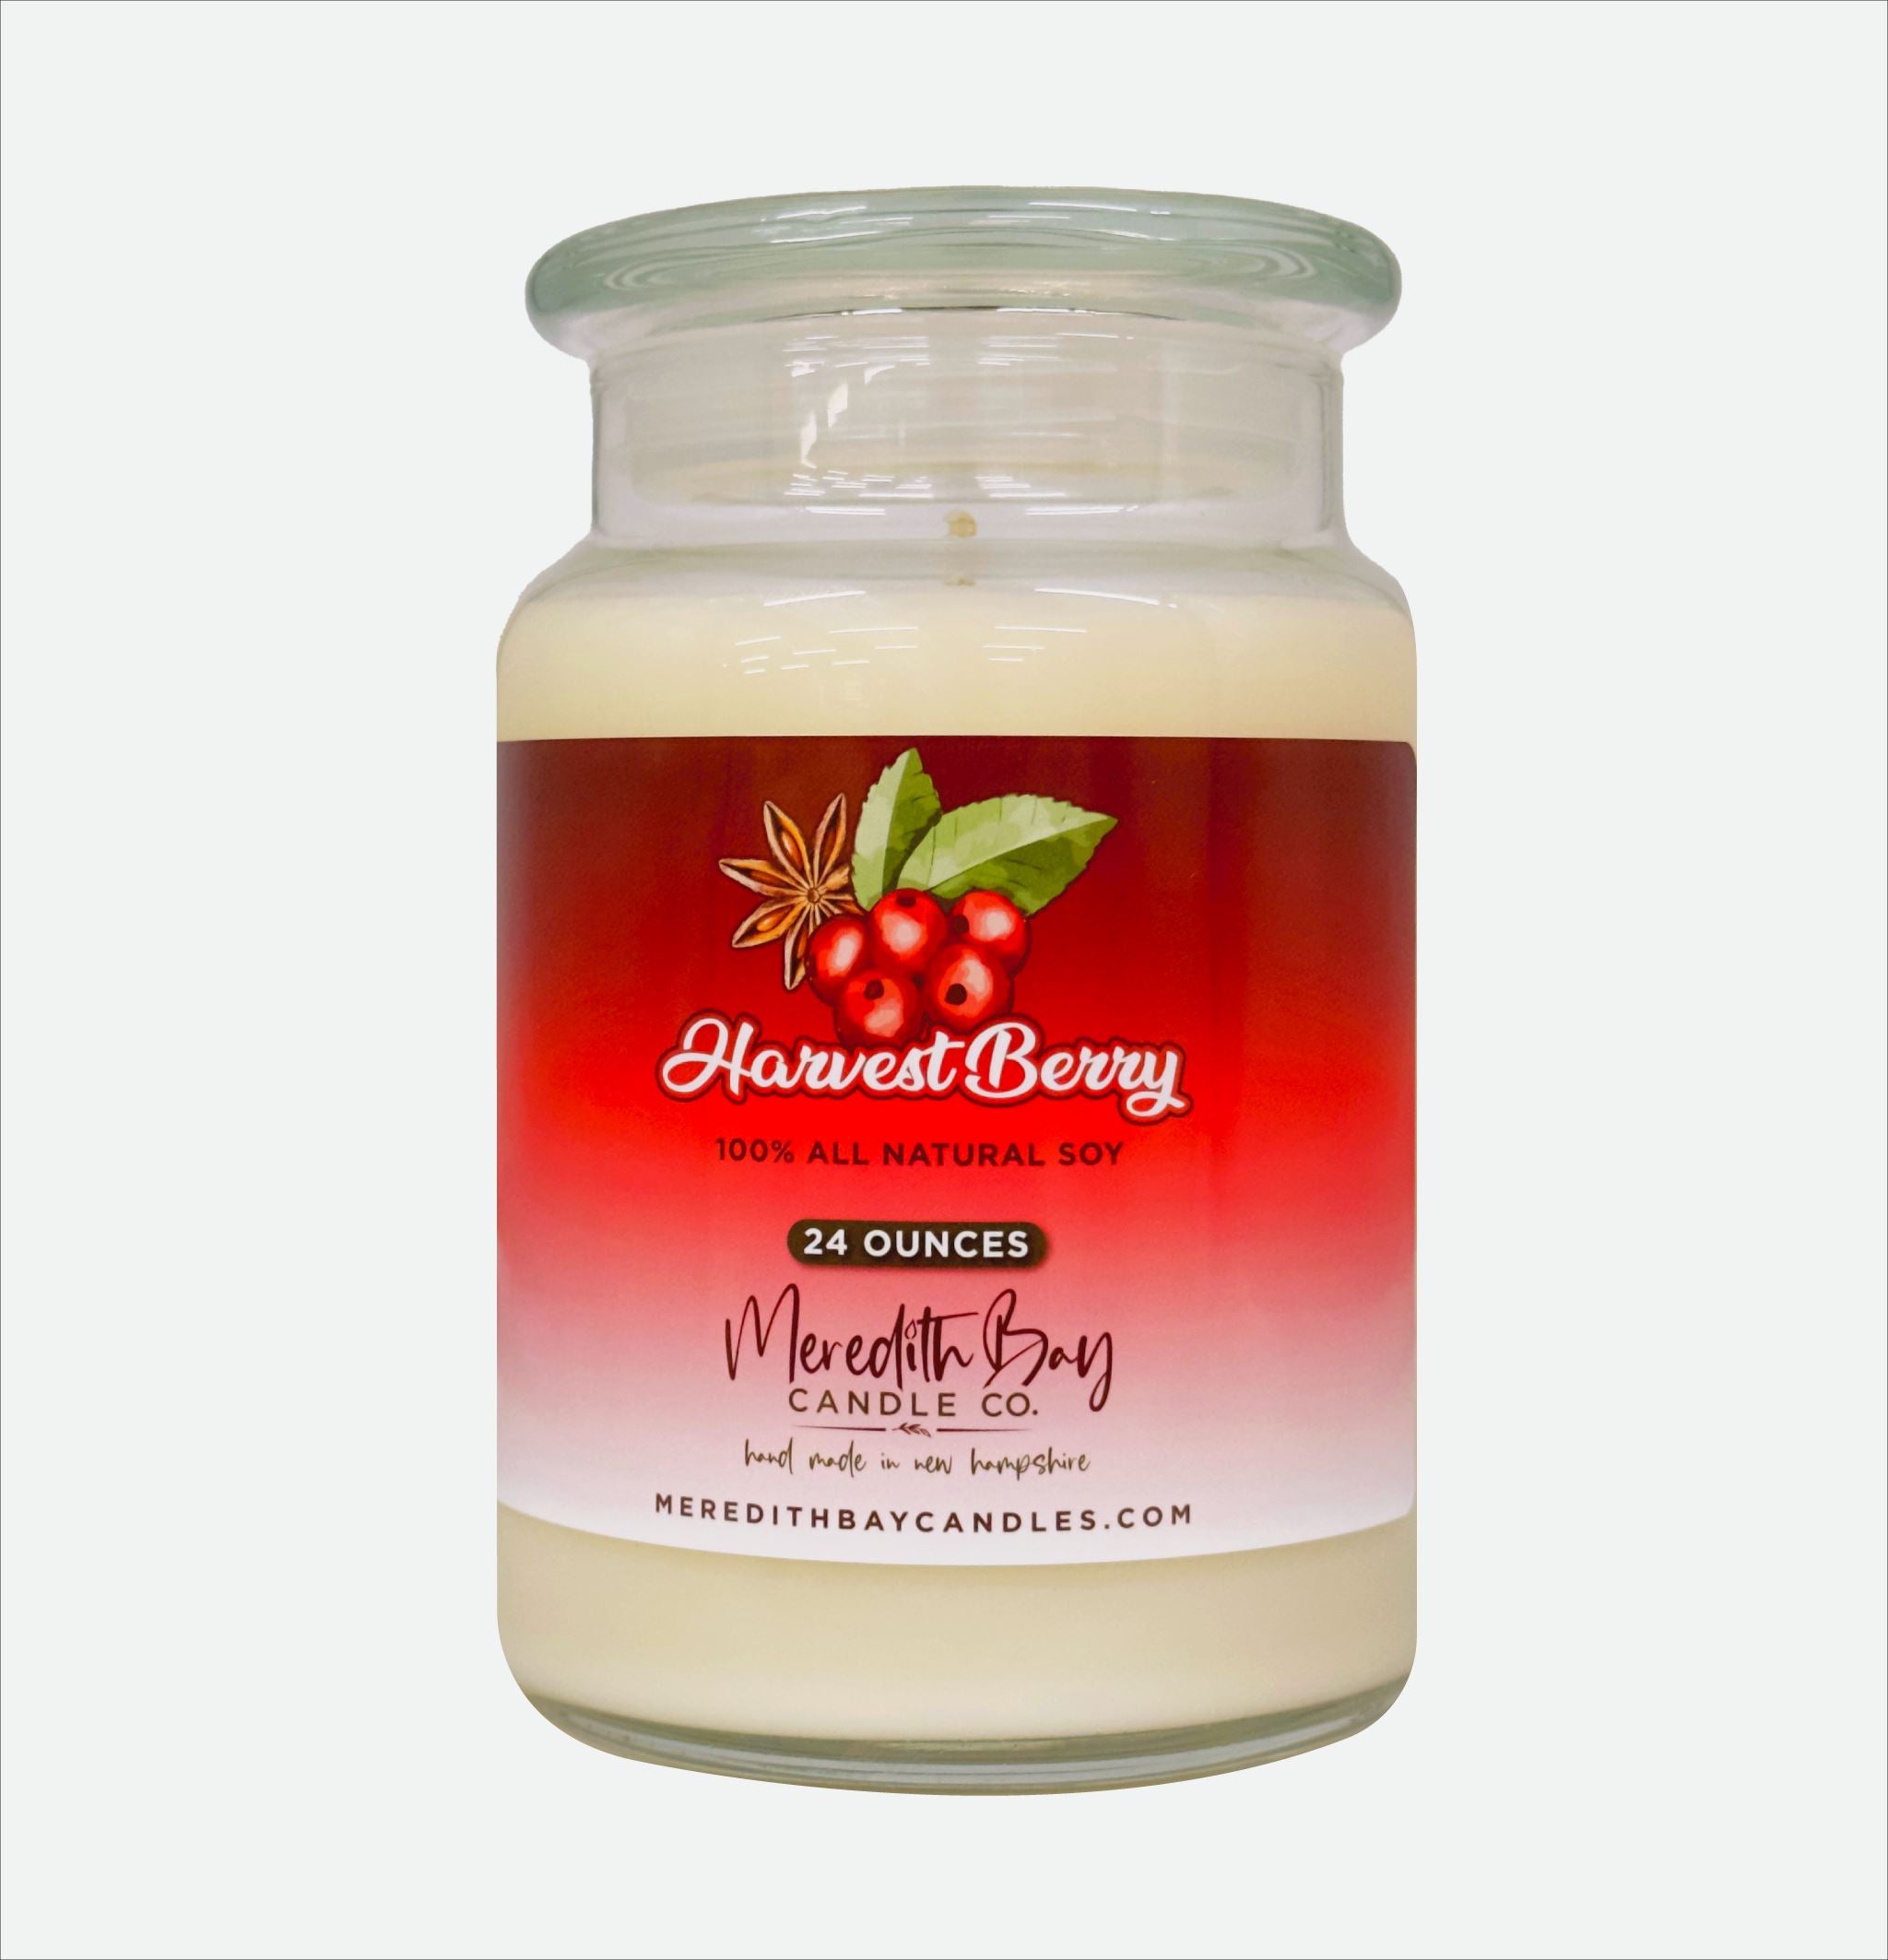 Harvest Berry Soy Candle Meredith Bay Candle Co 24 Oz 